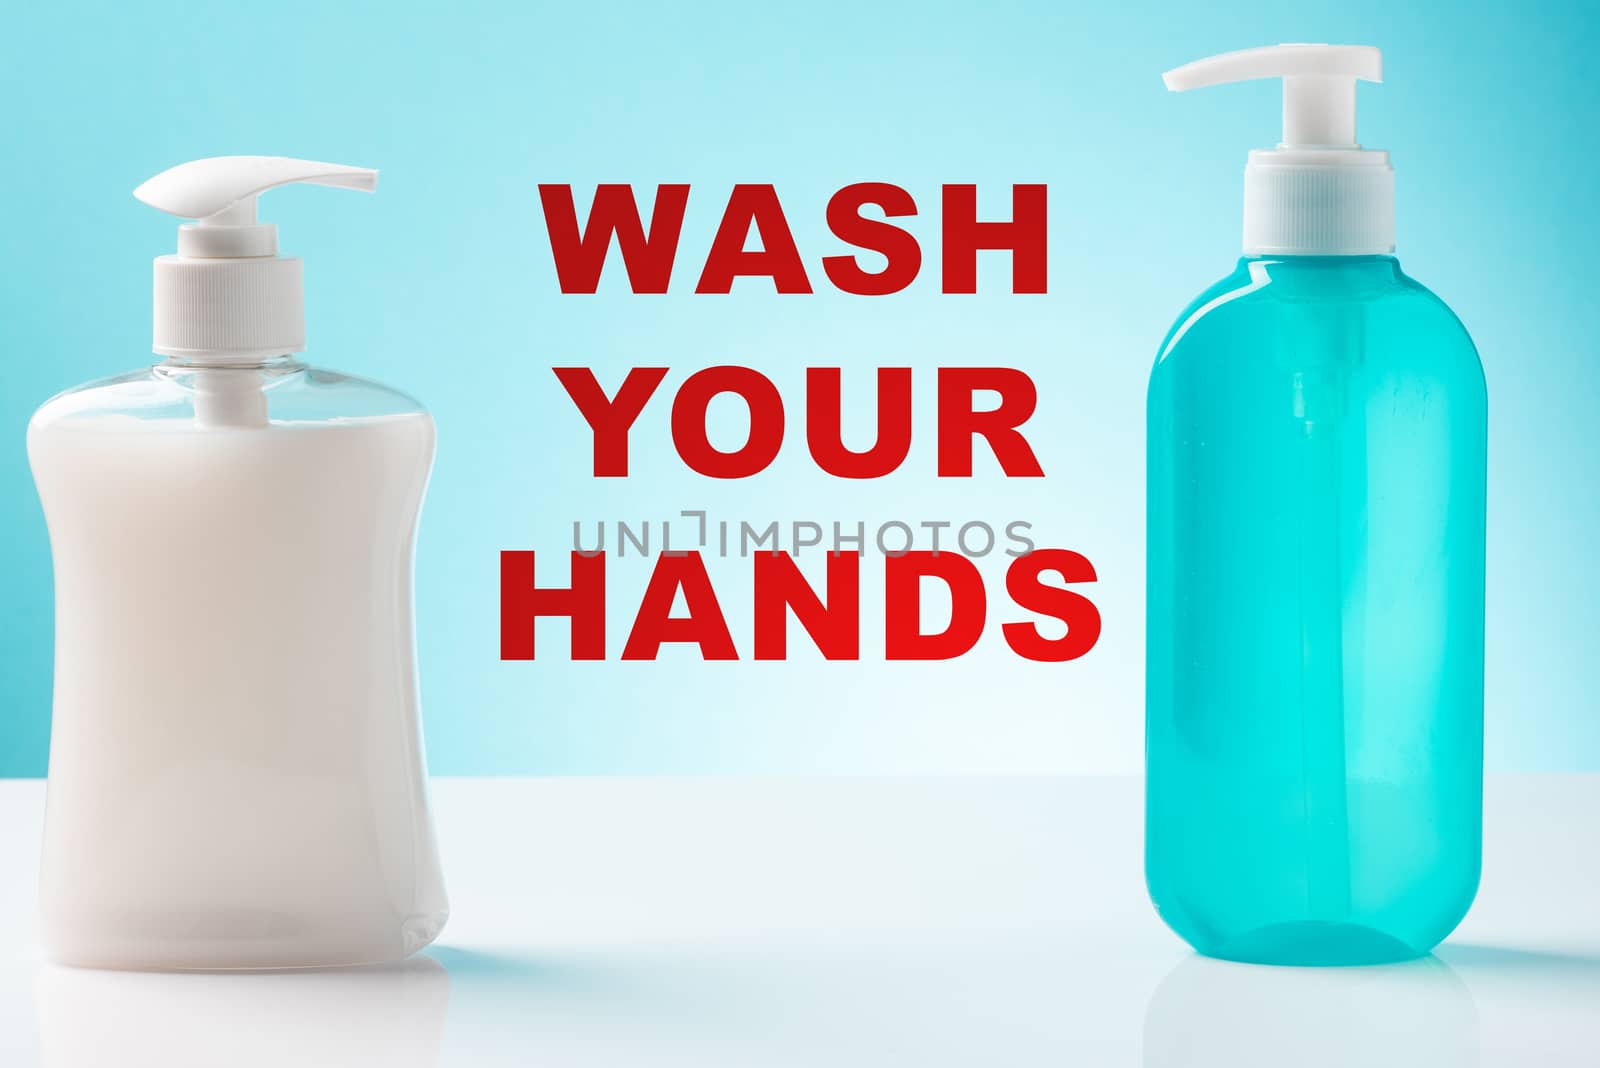 Wash Your Hands Information Background with Hand Sanitize Gel and Soap.